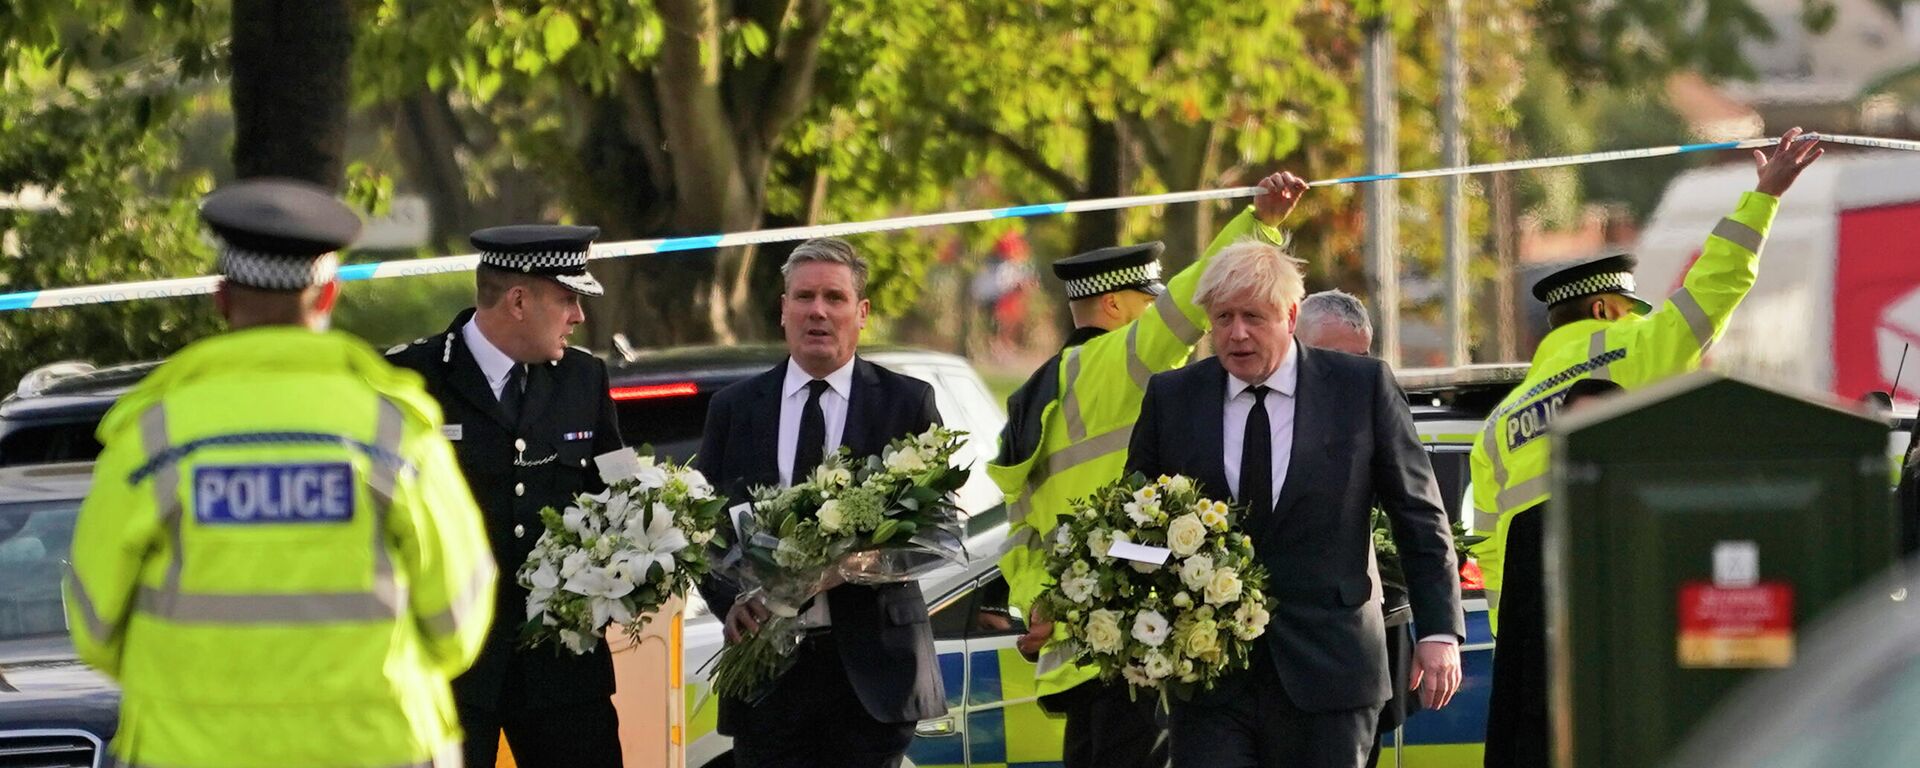 British Prime Minister Boris Johnson, right, and Leader of the Labour Party Sir Keir Starmer, second from right, carry flowers as they arrive at the scene where a member of Parliament was stabbed Friday, in Leigh-on-Sea, Essex, England, Saturday, Oct. 16, 2021 - Sputnik International, 1920, 18.10.2021